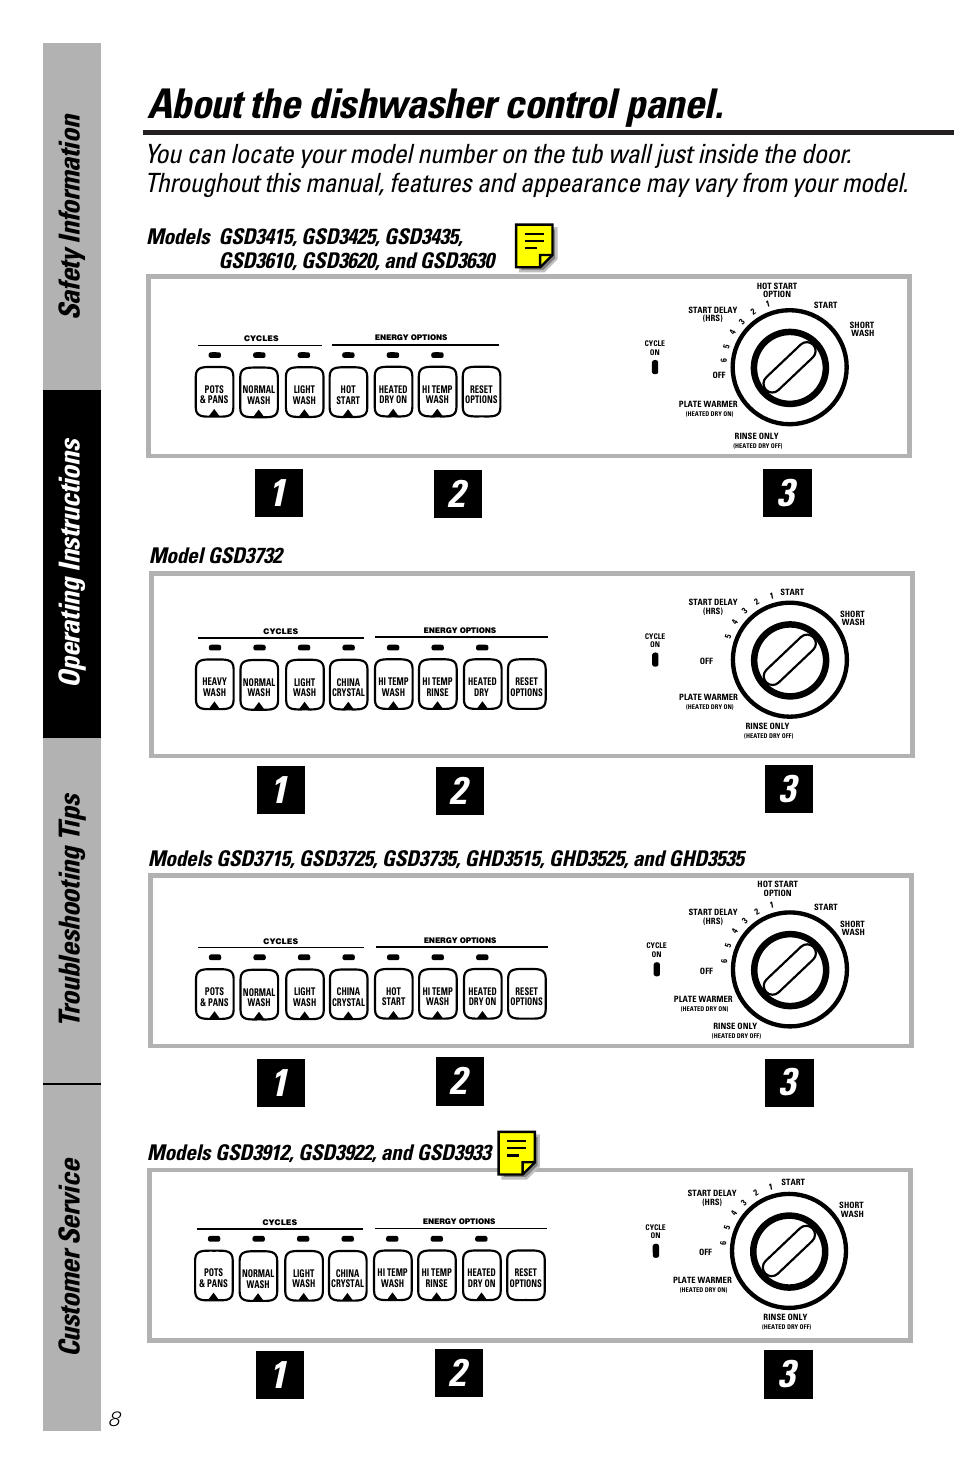 Control panel, About the dishwasher control panel, Model gsd3732 | GE nautilus dishwasher User Manual | Page 8 / 32